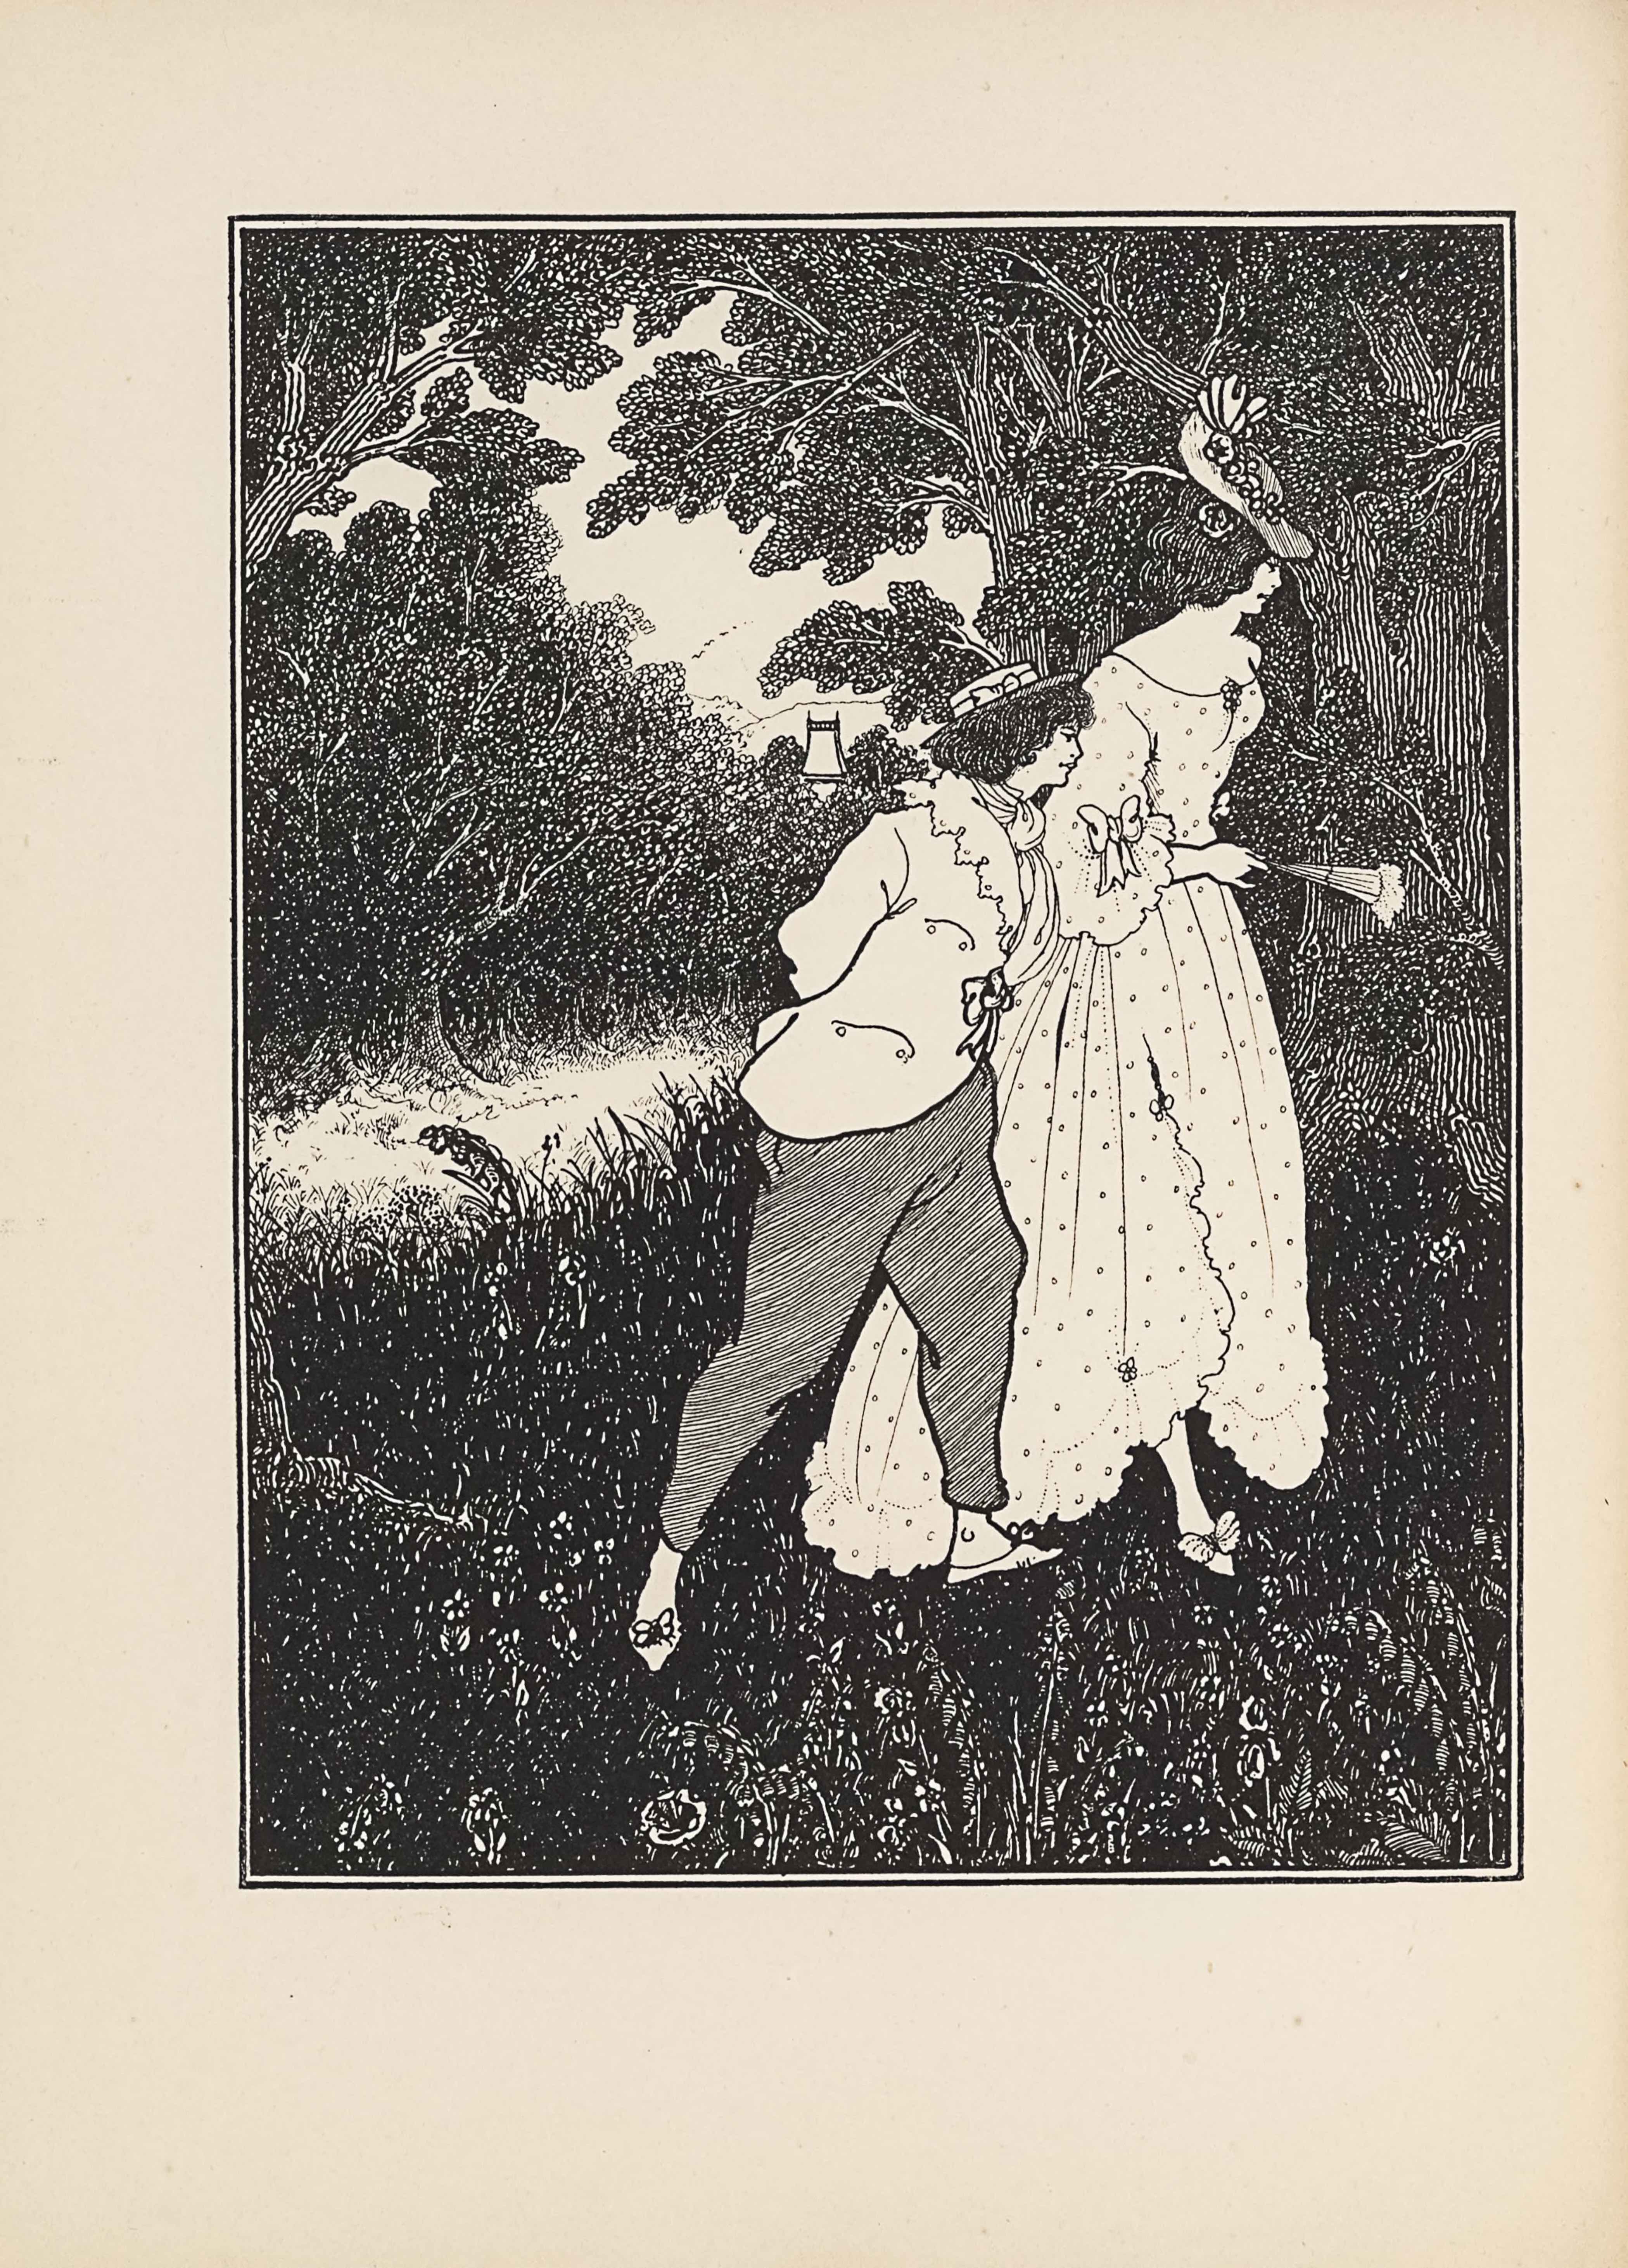 The line block reproduction of a pen-and-ink drawing is in portrait orientation. A woman and a small man or boy are walking through a forest. In the foreground for about one-fifth of the page are plants and flowers. In the mid-ground centrally is the shorter man or boy, shown in mid-step and in profile. He takes up the middle half of the page and is facing in portrait towards the right side. He is wearing slippers with bows on the toe of each, pants, and a lace collared overcoat tied together in the middle with a bow. A scarf is wrapped around his neck and tucked into the coat. His hair is short and curly and he wears a boater-style hat with a ribbon around the crown. Behind him and slightly to the right is a tall woman. This woman takes up about three-quarters of the page in height and together with the man they span about one-third of the page in width. She is also facing to the right and taking a step in that direction. She has on bow slippers as well, but is wearing a long dress. The dress has a ruffled edge on the skirt bottom and sleeve, with polka dots scattered about and a large bow on the arm cuff. The dress has a wide boat neck. In her right hand is a mostly closed fan with feathering on the top edge. Her hair is pulled up and a floral hair piece is on the right side of her head. She is wearing a large brimmed sun hat, tilted down towards her face and it is has flowers around the crown. In the background on the right behind the woman is a tall tree with an exposed trunk and leaves that are above the frame. To the left in the background is a light path headed from the midline of the left side towards the central vanishing point. On either side of the path is more foliage, with trees rising up behind and leaving only a small space for the light sky to come through. The small pointed roof of a building peeks out from above the trees in the centre of the background.